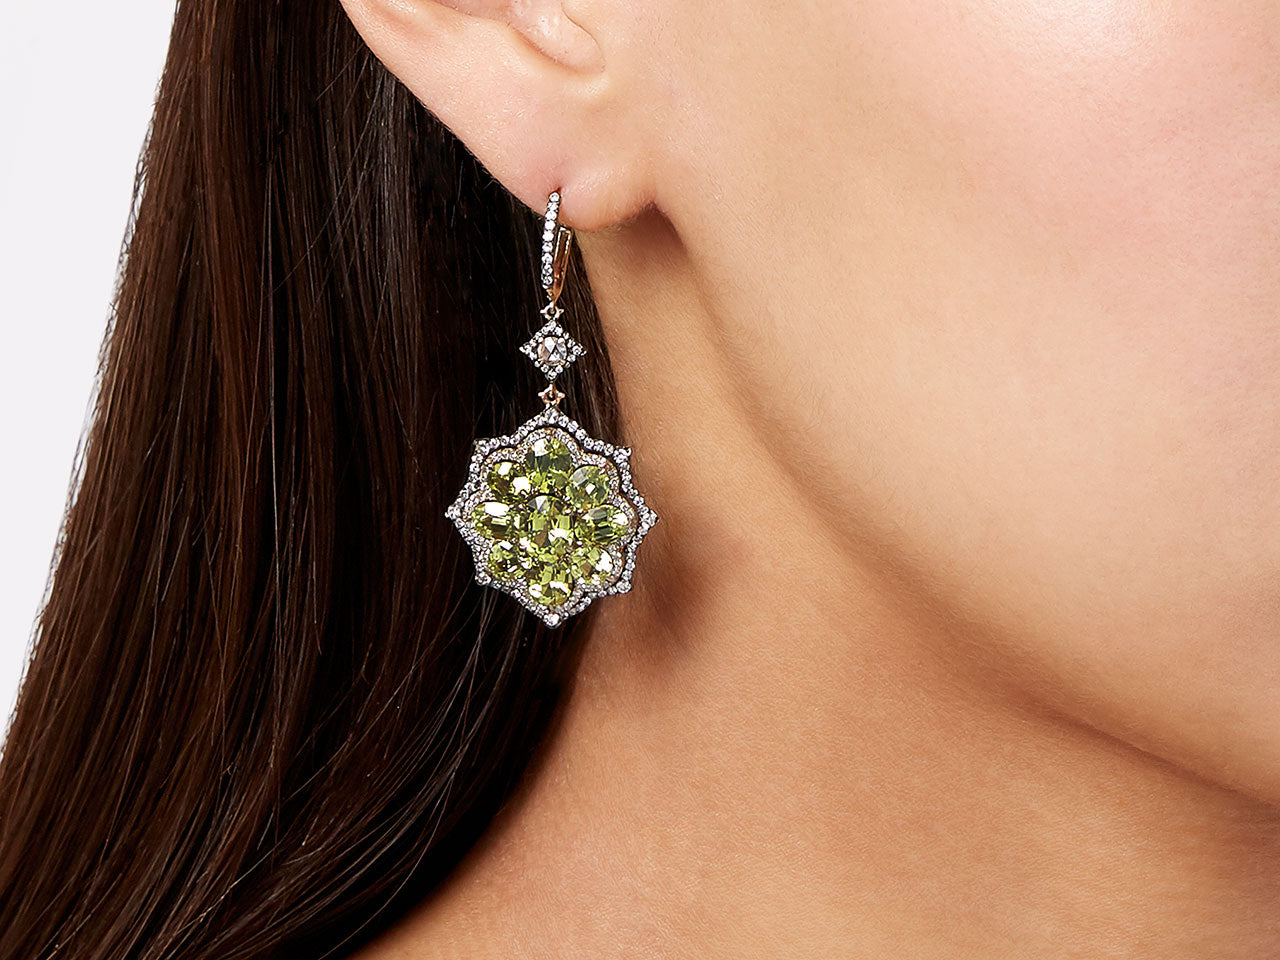 IVY Chrysoberyl and Diamond Earrings in 18K Rose Gold